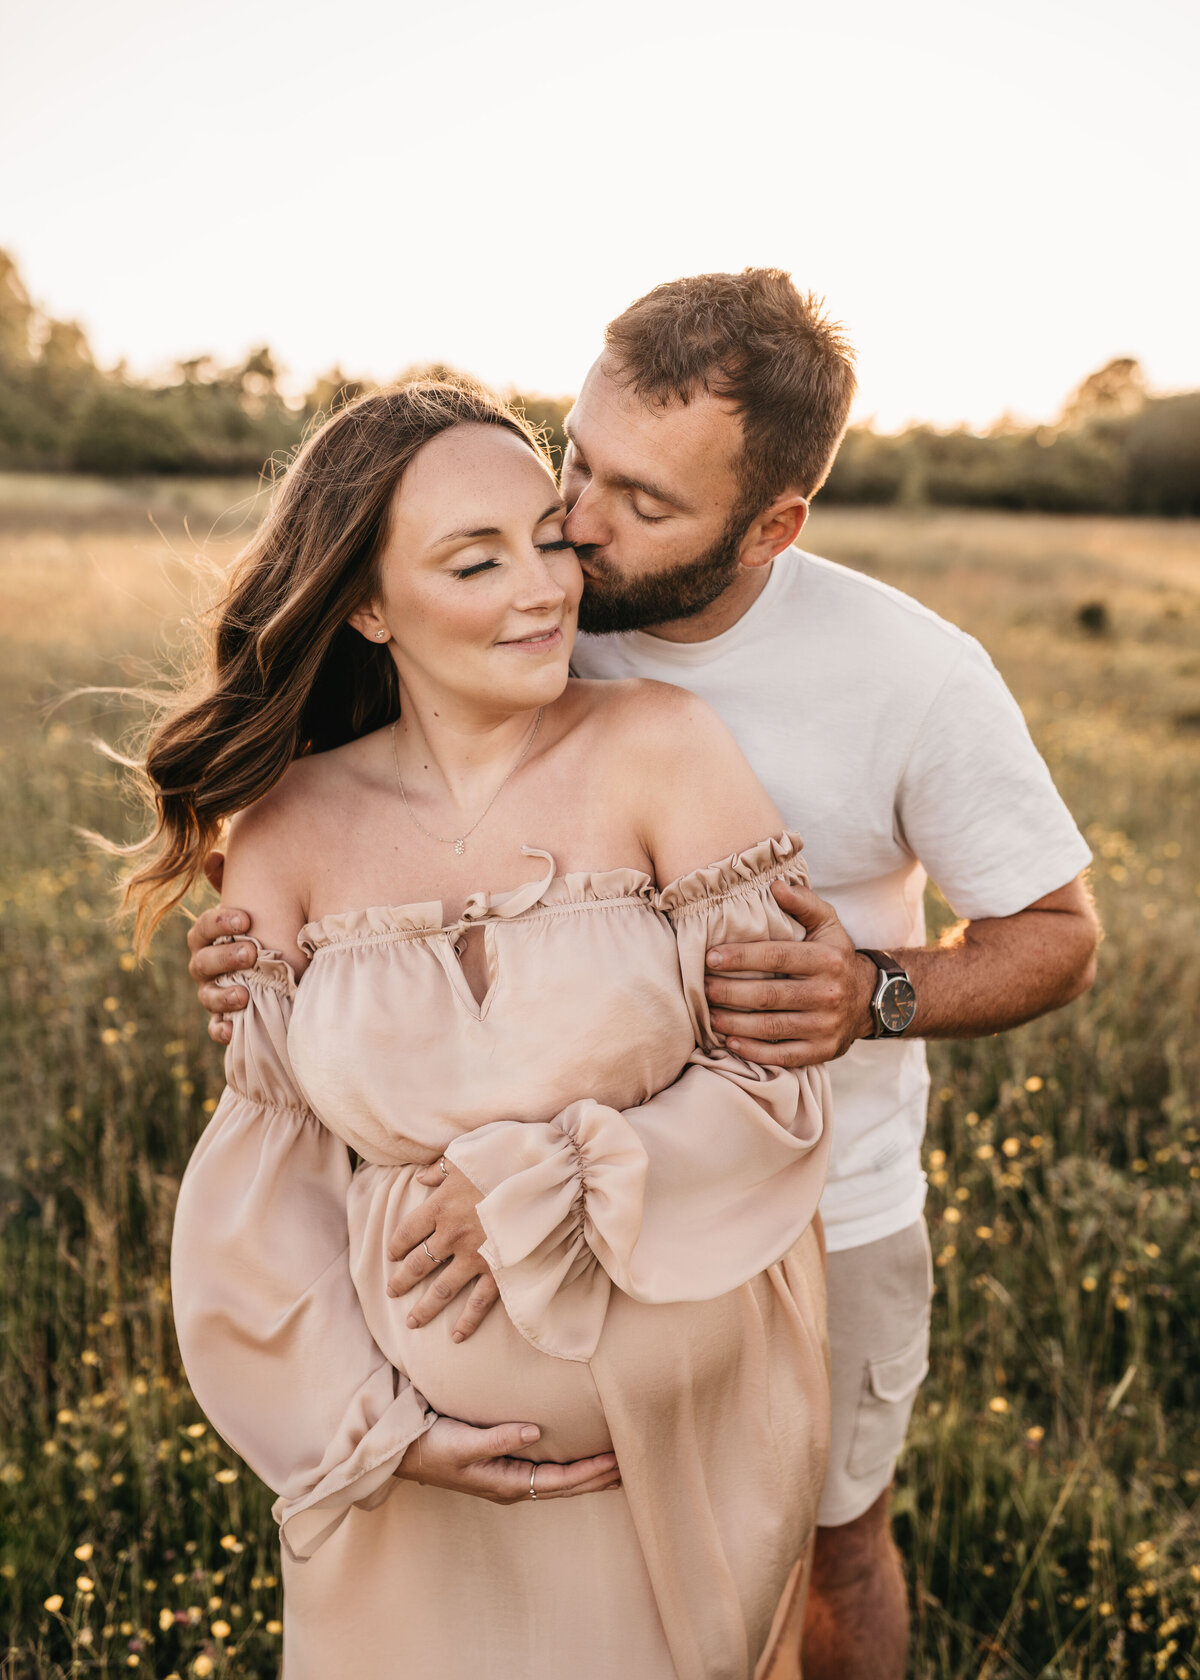 Photo of a couple having a maternity photoshoot outdoors at sunset in a field of flowers